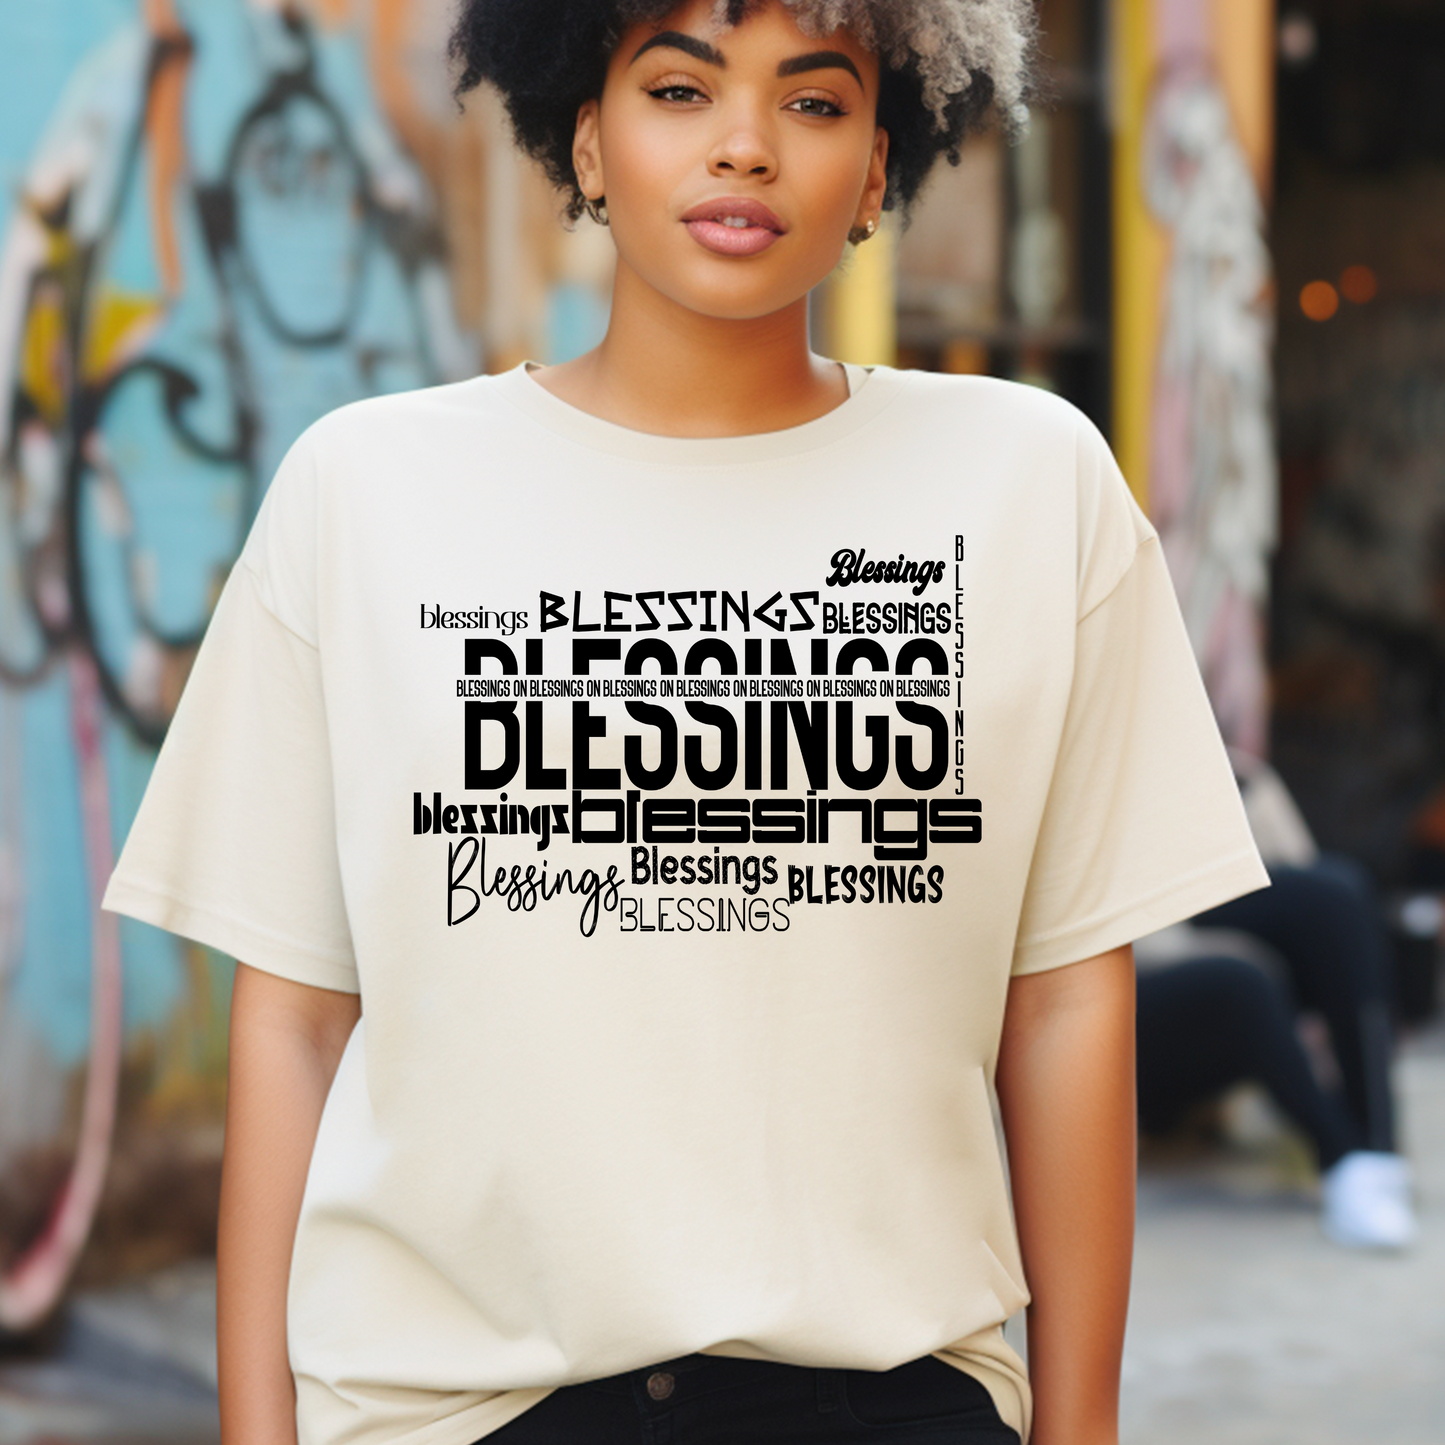 Elegant tan 'Blessings on Blessings' T-shirt from Triumph Tees. This faith-inspired apparel features a striking design, perfect for those who want to express their beliefs stylishly